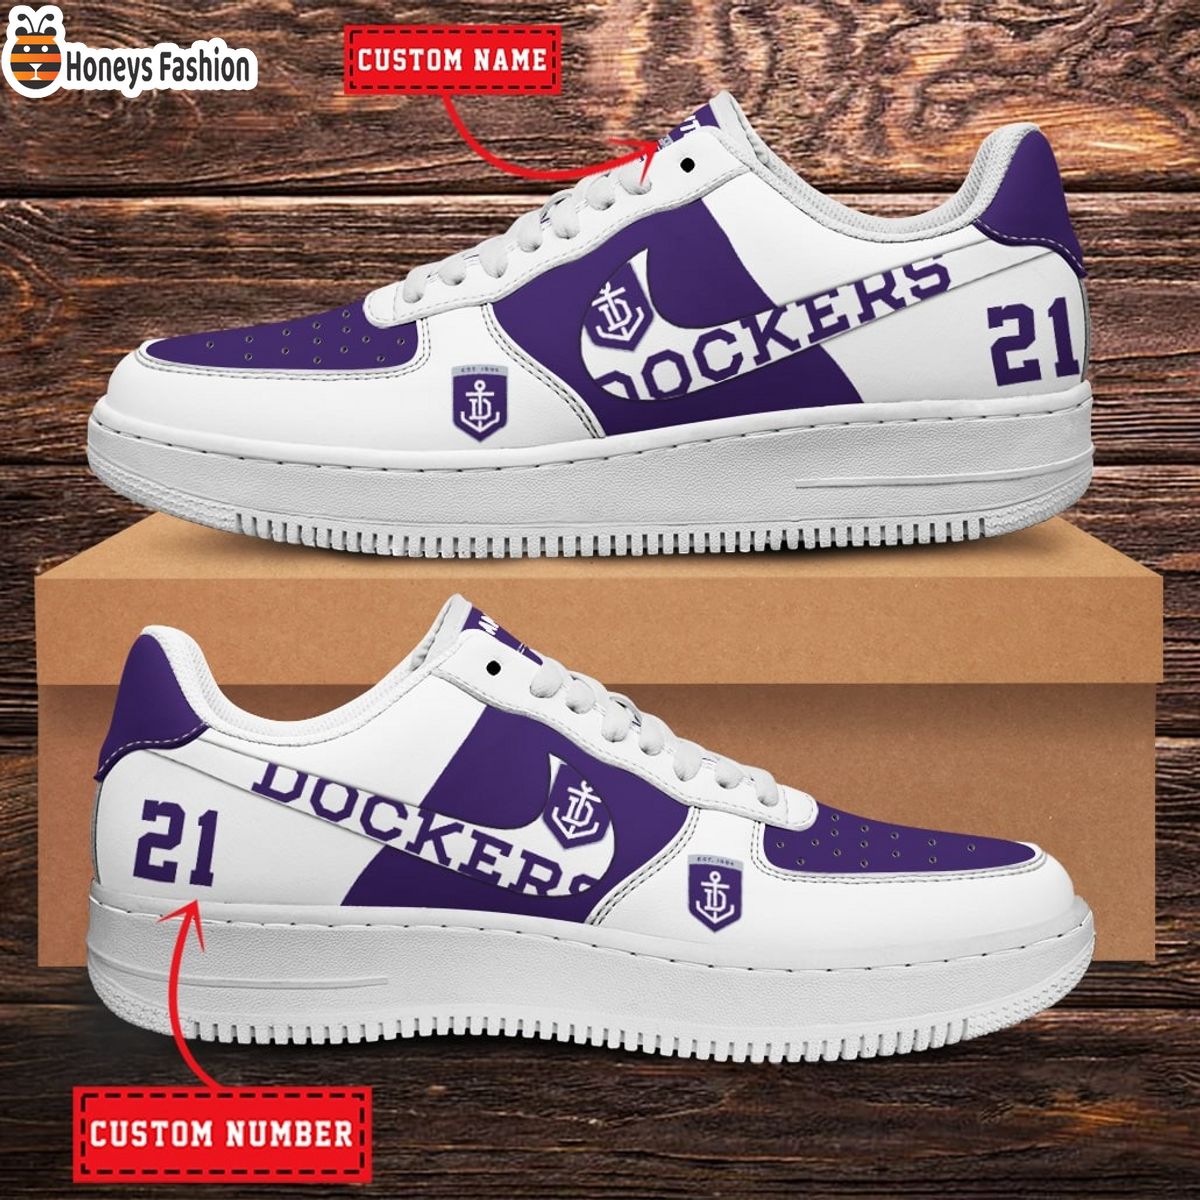 Fremantle Dockers AFL Personalized Air Force 1 Shoes